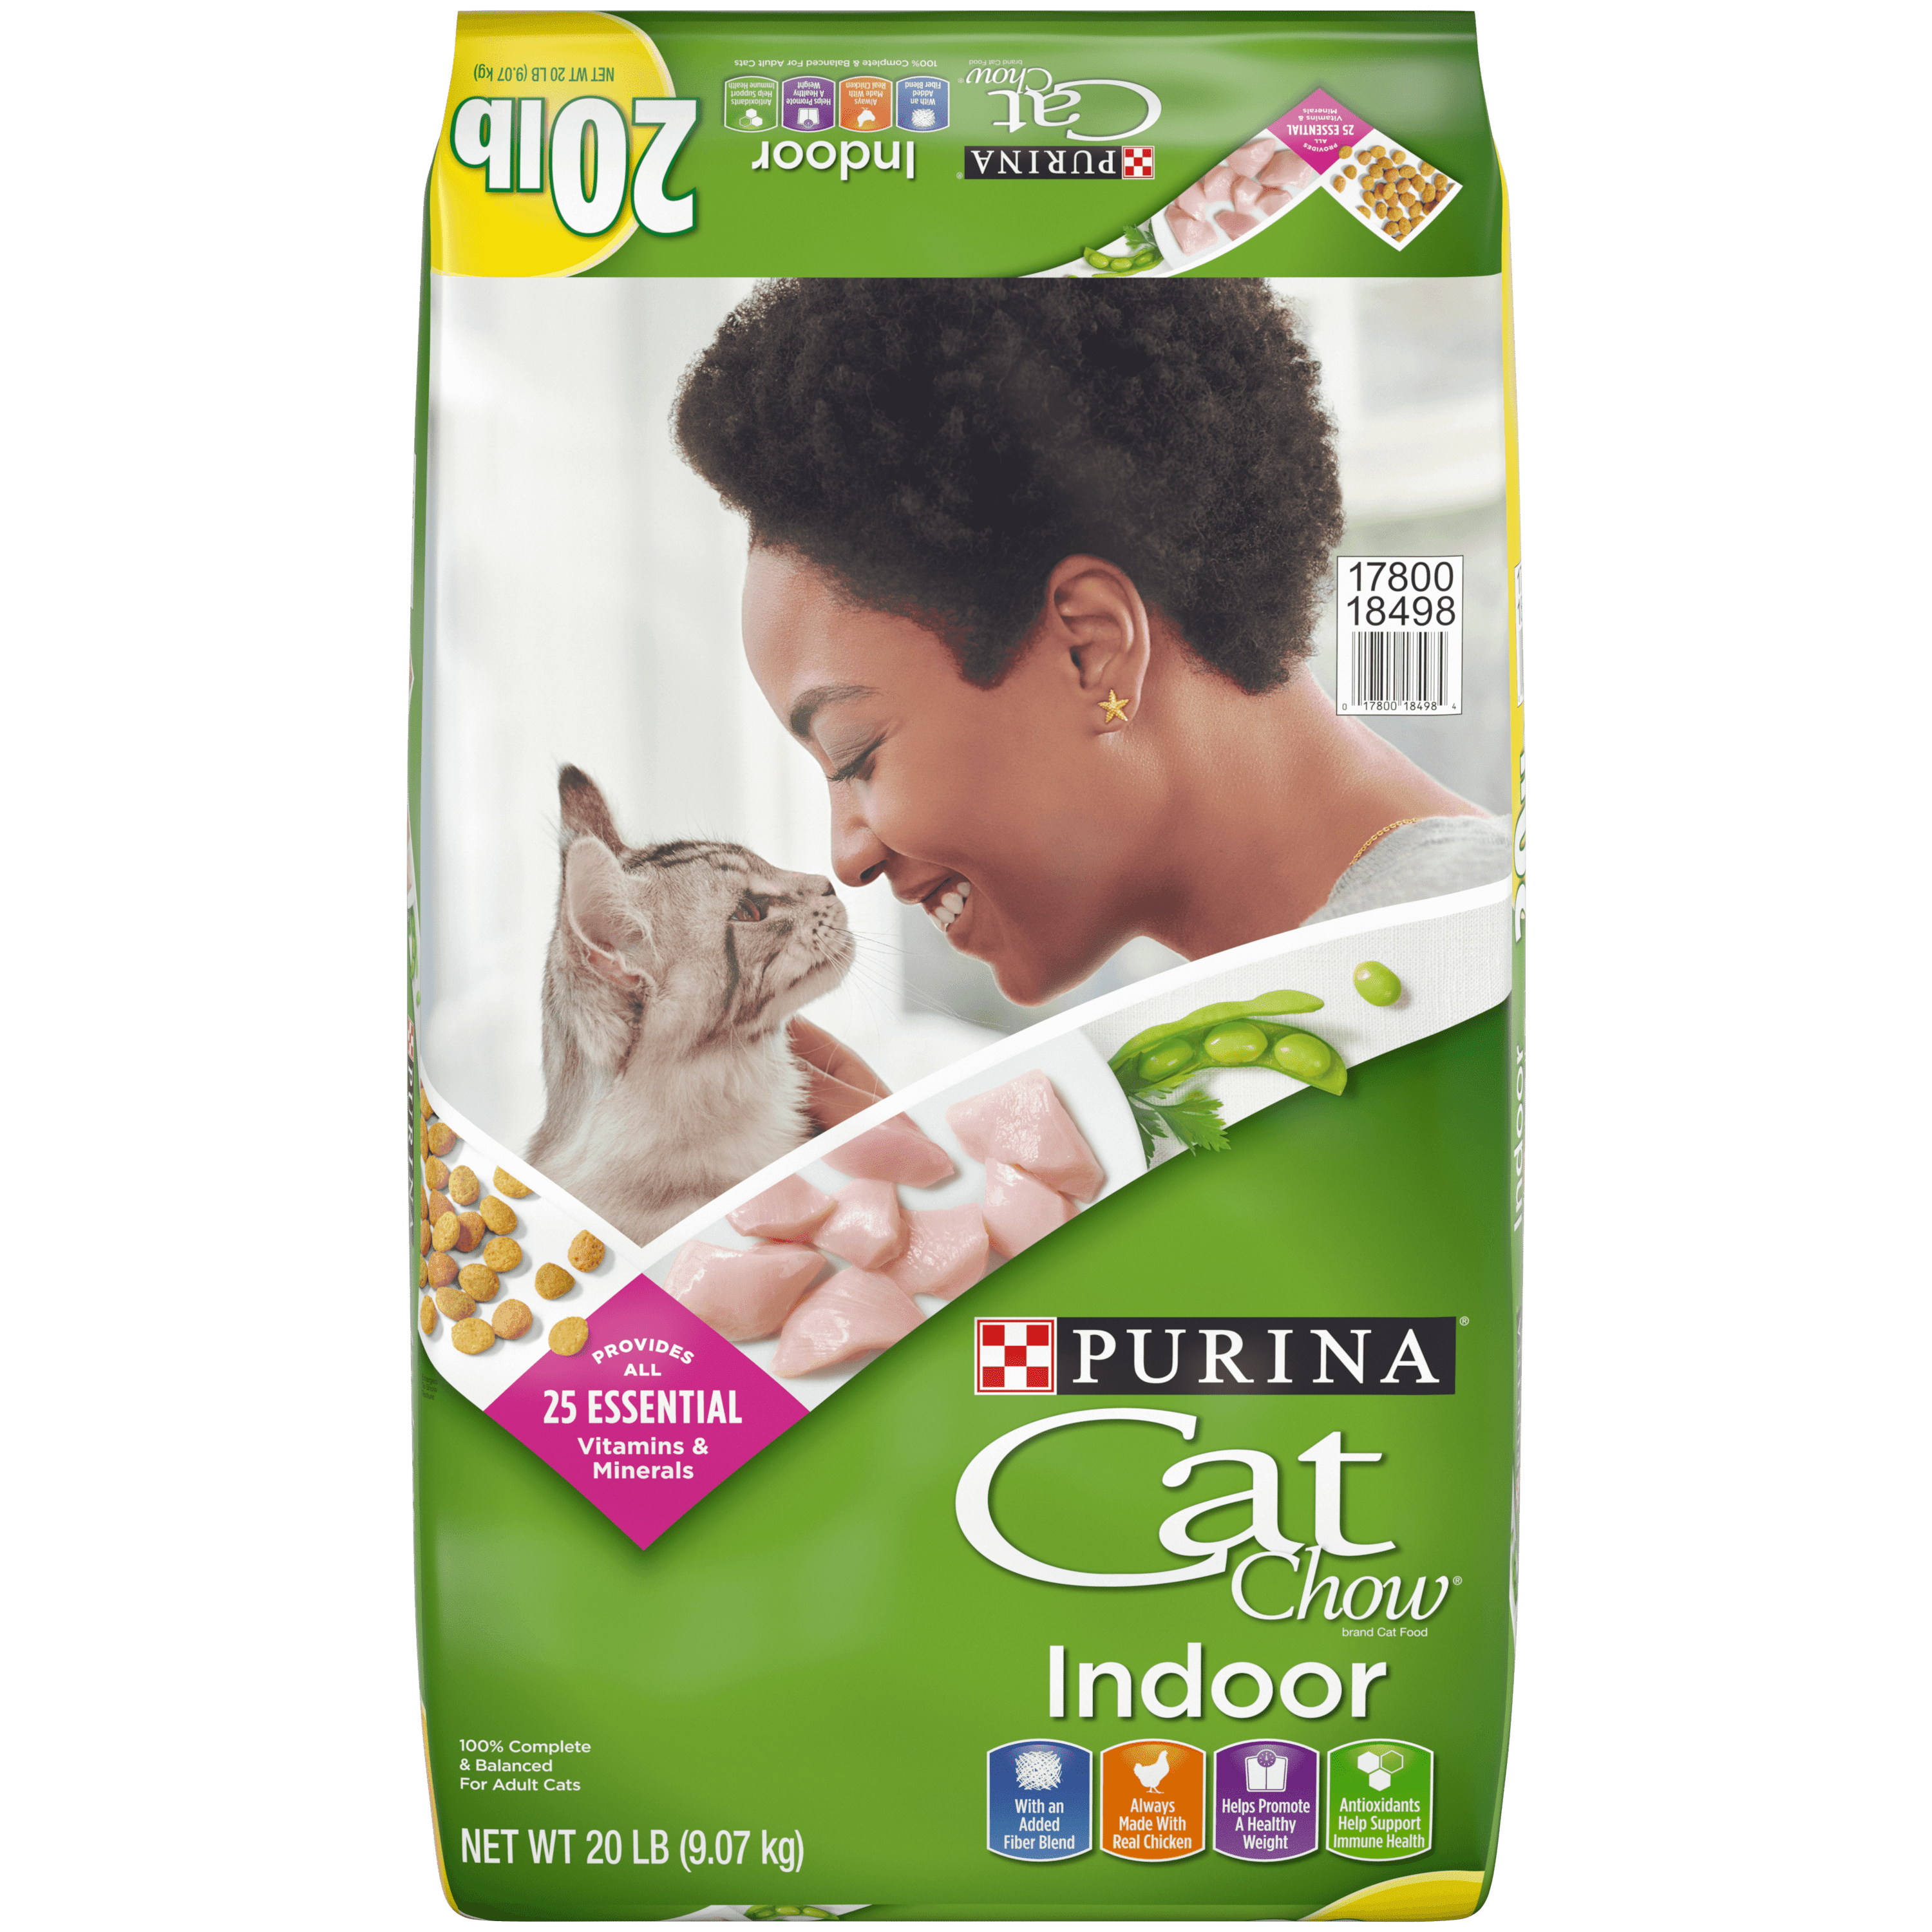 Purina Complete Cat Food Review